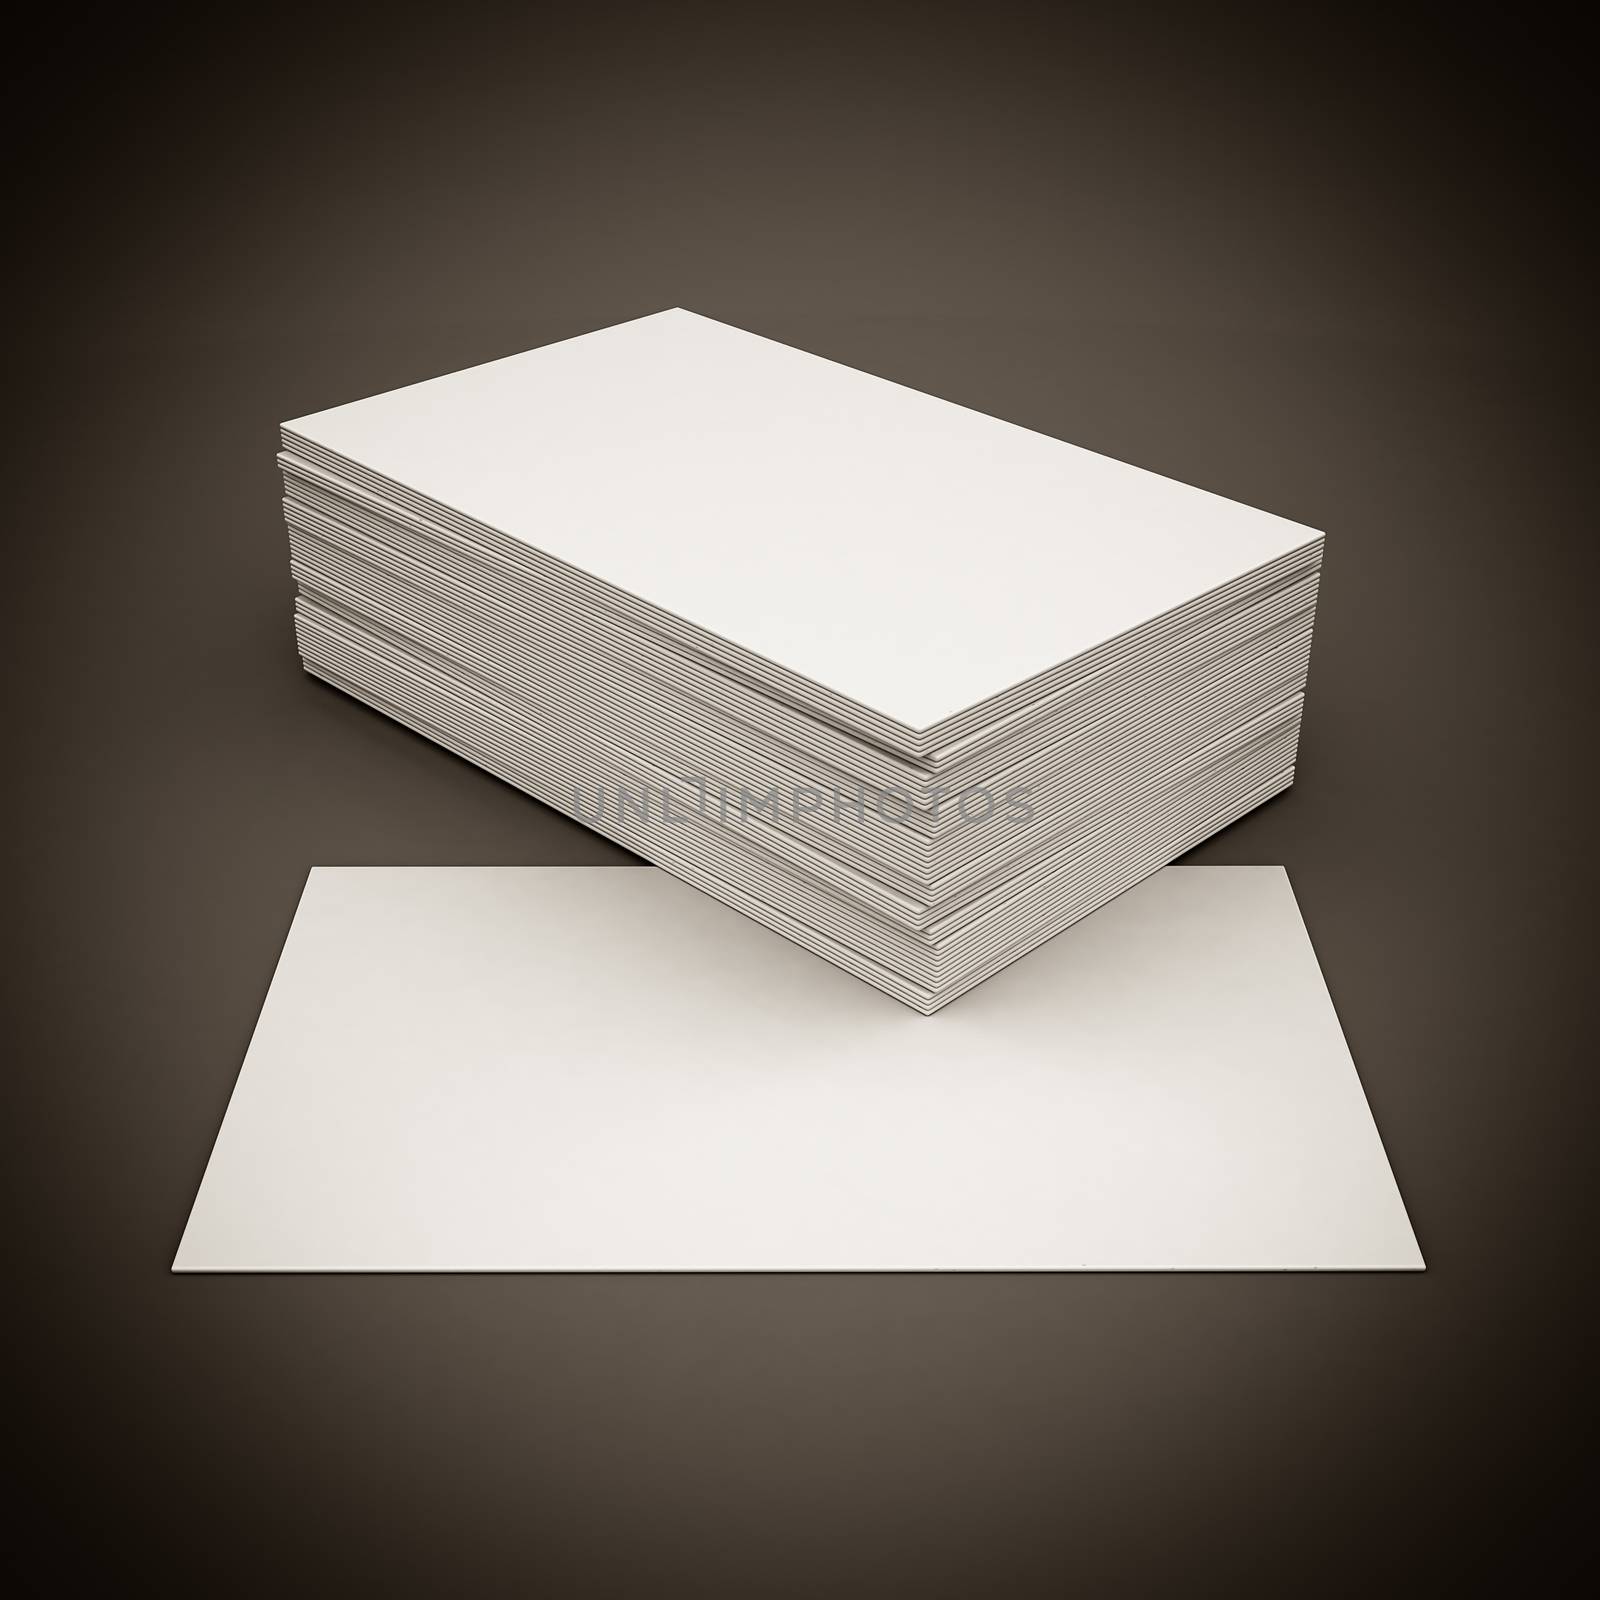 Business cards blank mockup - template - gray background. black and white